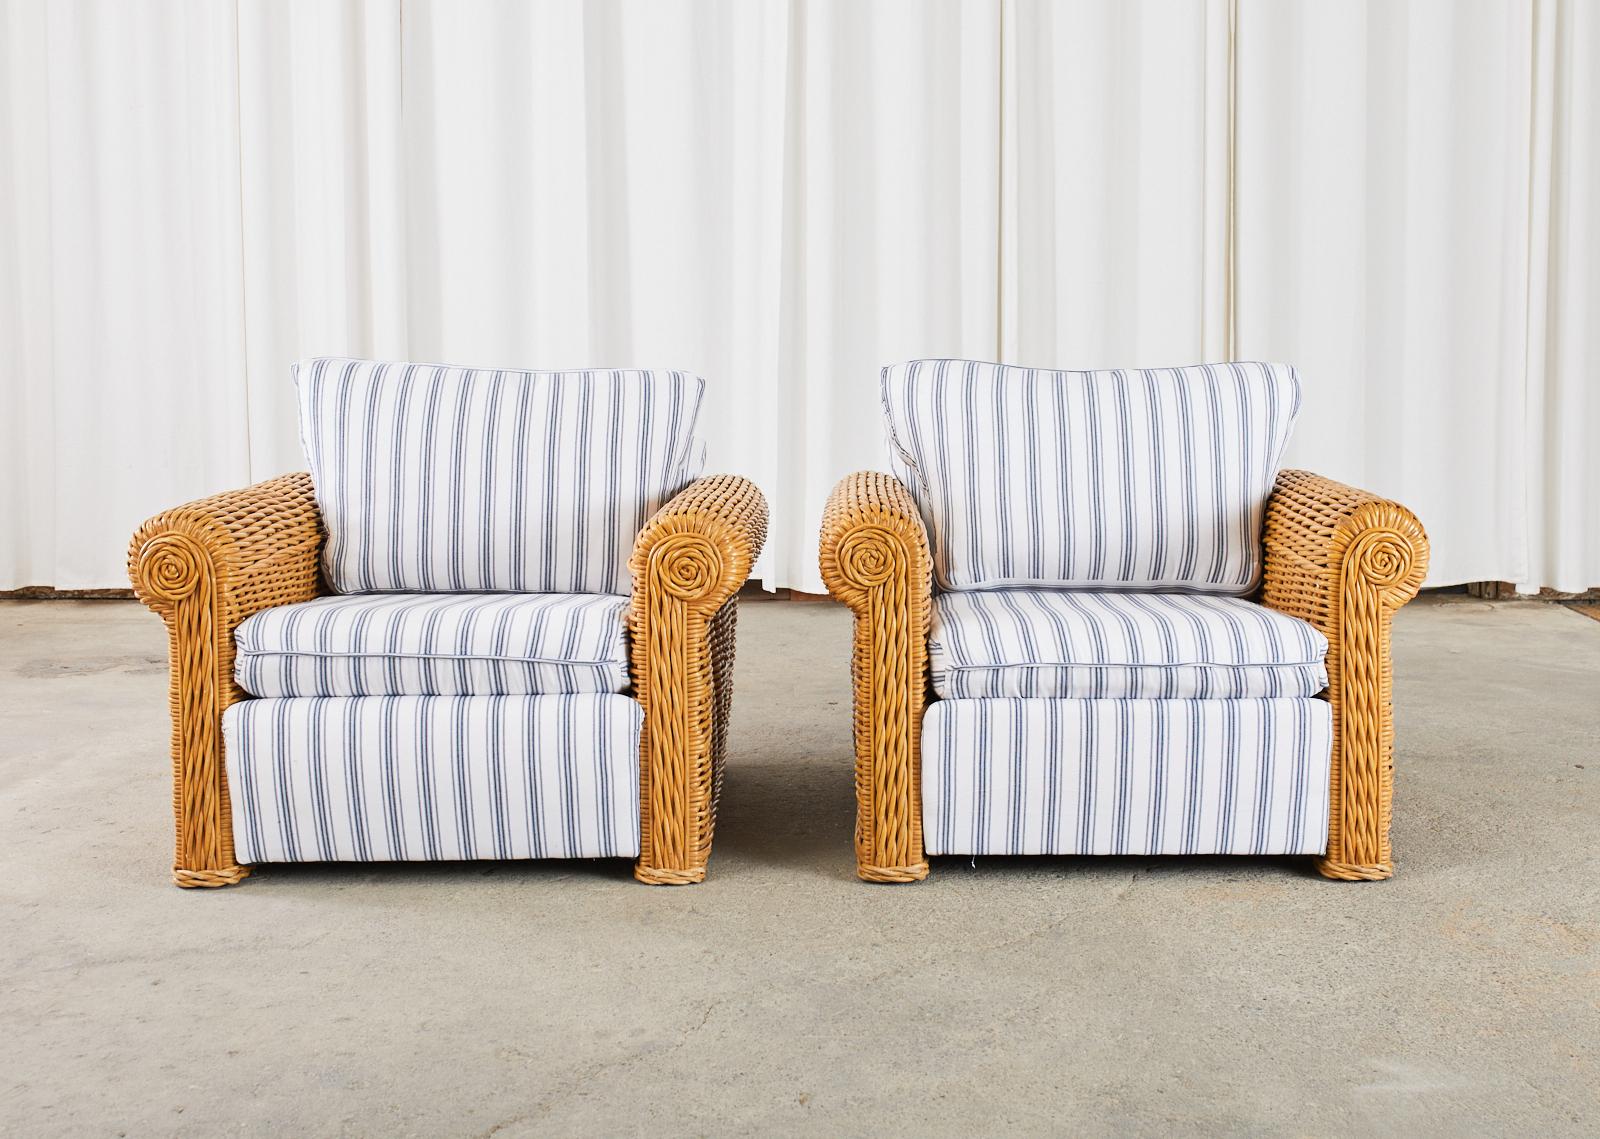 Fantastic pair of large club chairs or lounge chairs made in the manner and style of Michael Taylor by Henry Link Designs. The chairs feature a wooden frame covered with woven rattan in geometric patterns and braided ends. The chairs represent